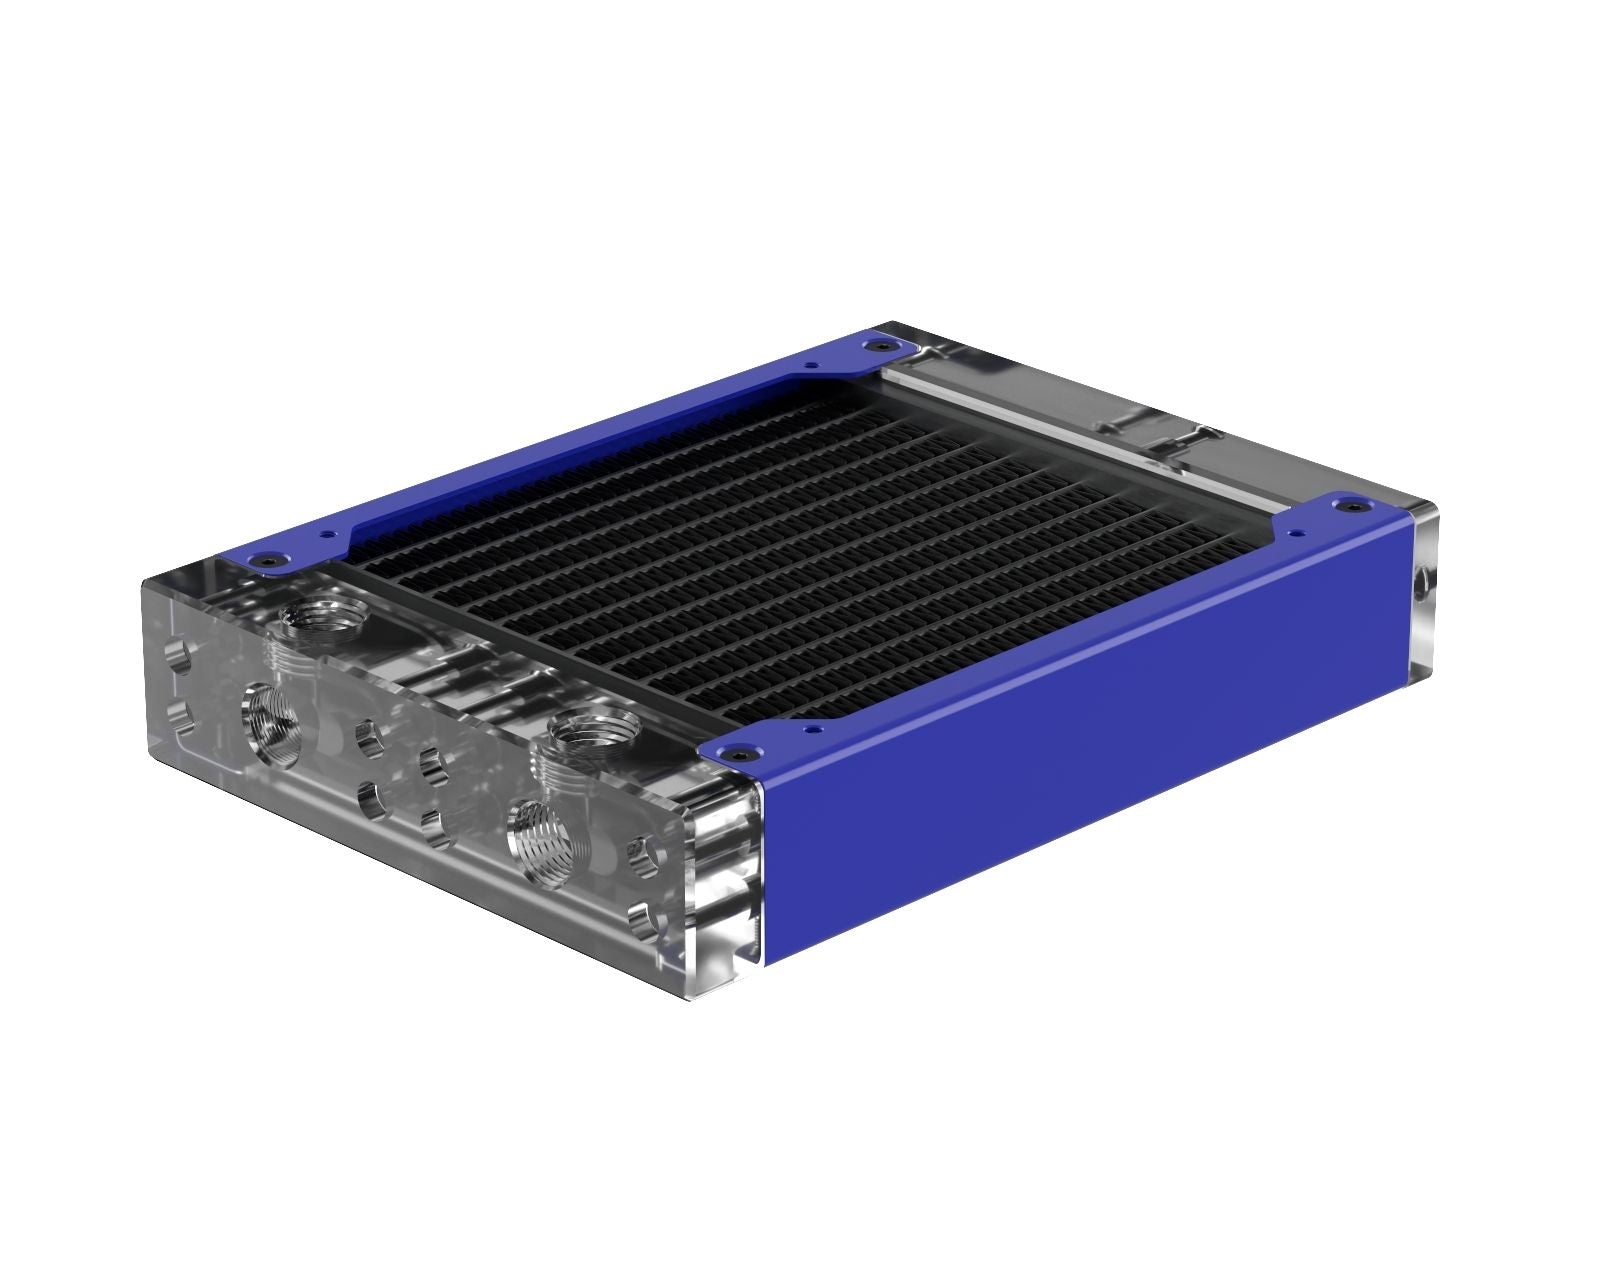 PrimoChill 120SL (30mm) EXIMO Modular Radiator, Clear Acrylic, 1x120mm, Single Fan (R-SL-A12) Available in 20+ Colors, Assembled in USA and Custom Watercooling Loop Ready - True Blue